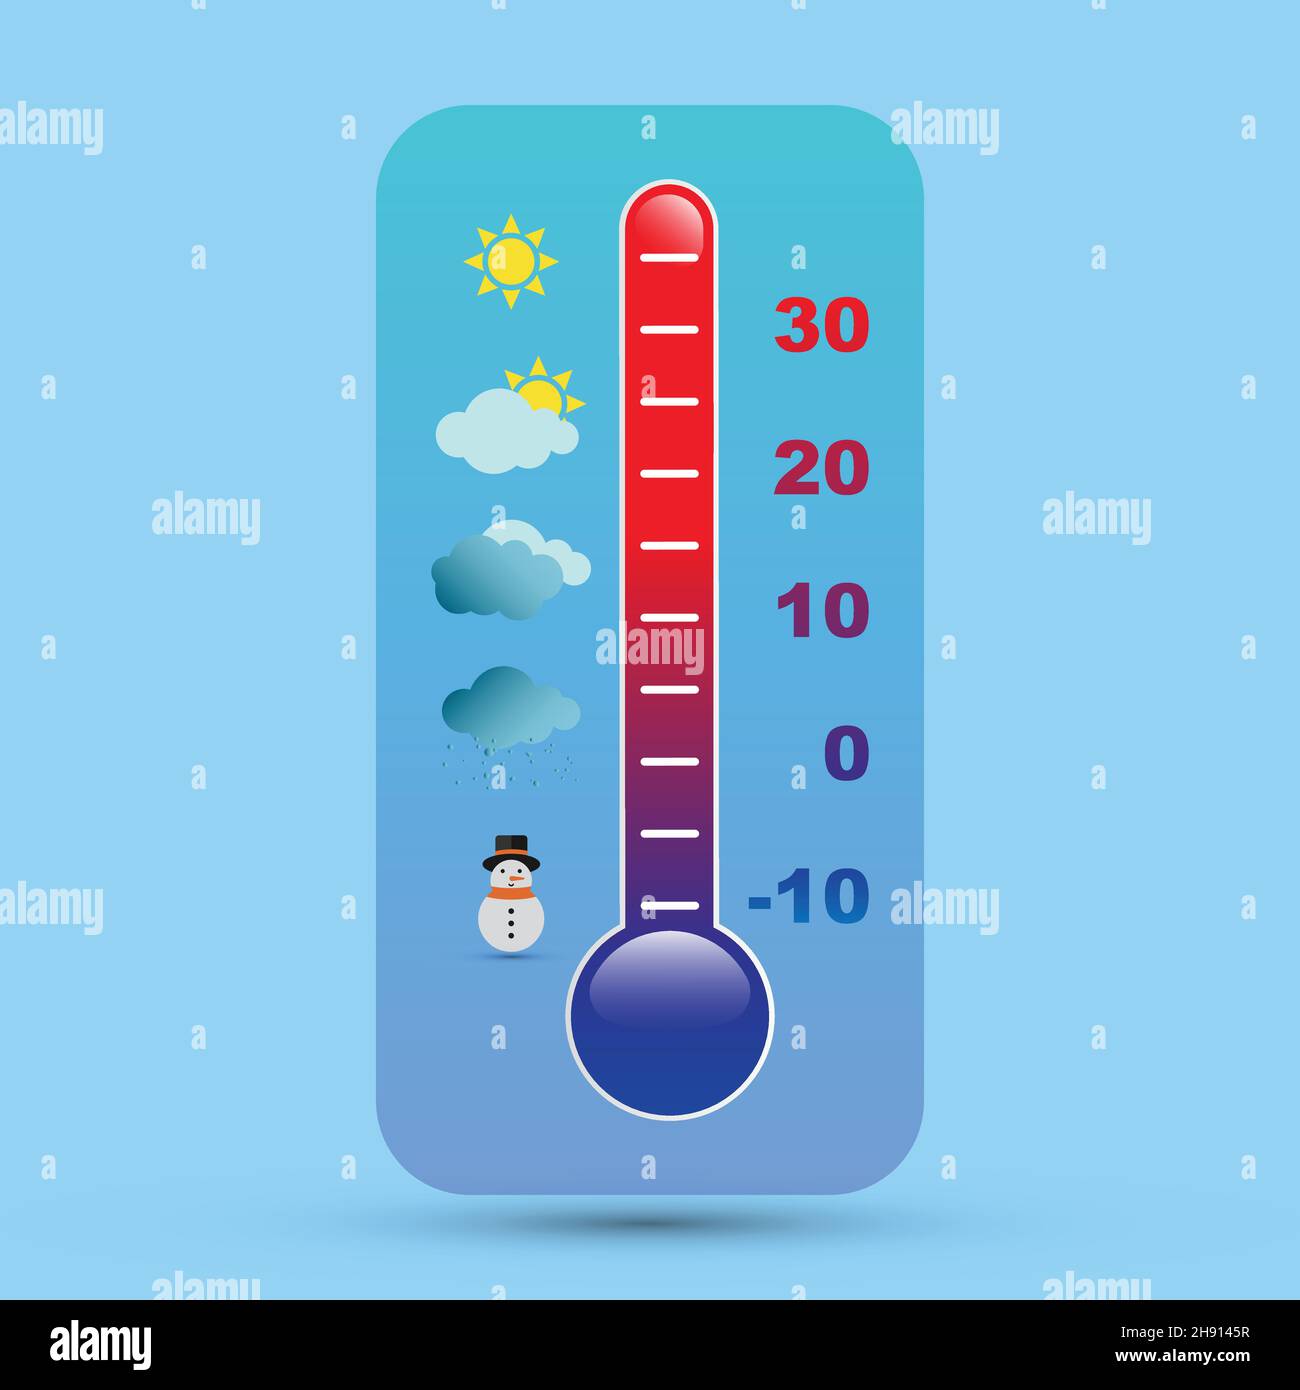 Fahrenheit And Celsius Scale White Round Thermometer For Measuring Weather Temperature  Thermometer Isolated On White Background Ambient Temperature Plus 40  Degrees Fahrenheit Stock Photo - Download Image Now - iStock